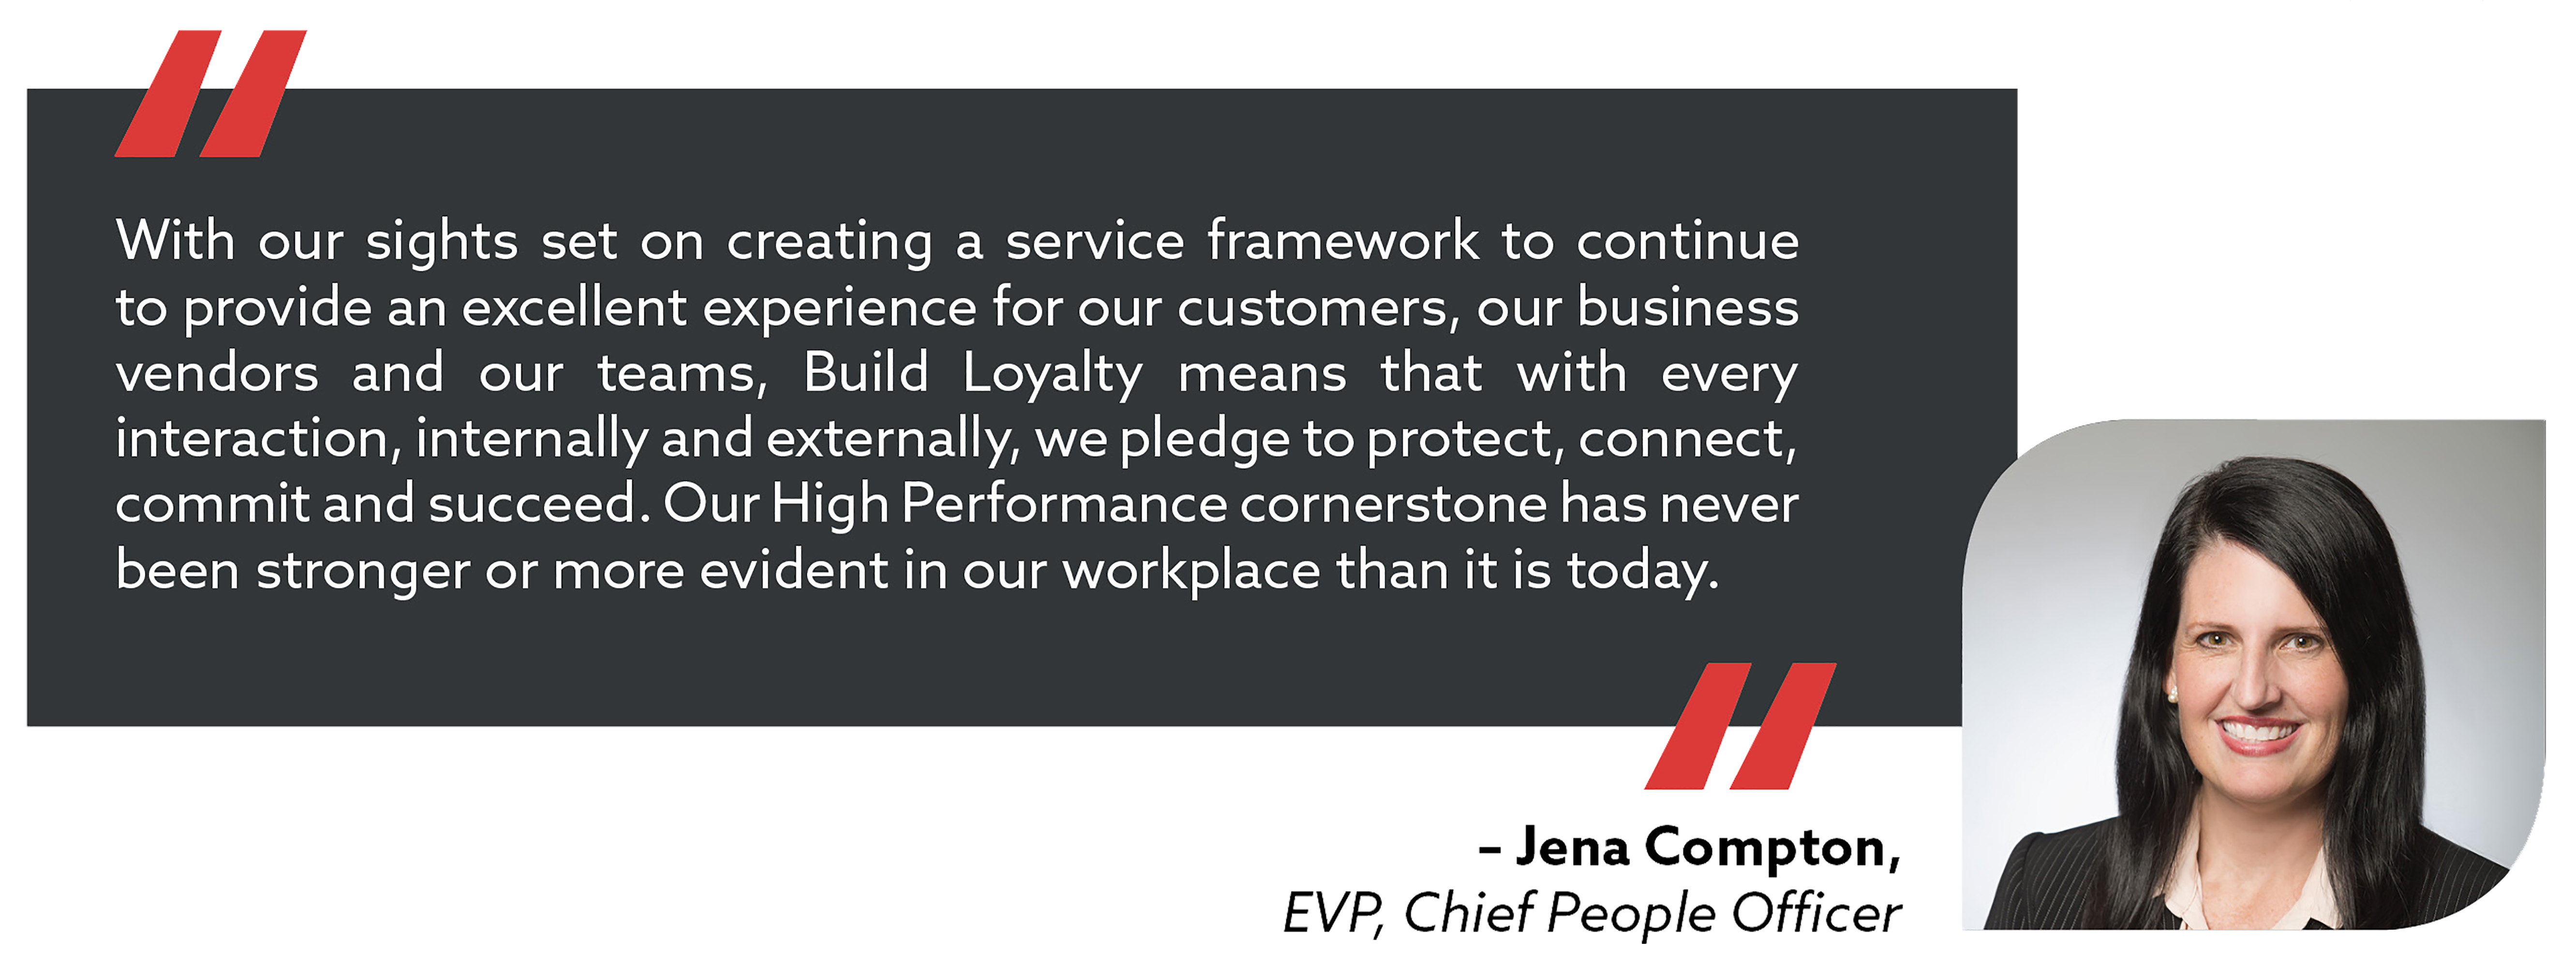 quote from Chief People Person Jena Compton. With our sights set on creating a service framework to continue to provide an excellent experience for our customers, our business vendors and our teams, Build Loyalty means that with every interaction, internally and externally, we pledge to protect, connect, commit and succeed. Our High Performance cornerstone has never been stronger or more evident in our workplace than it is today.